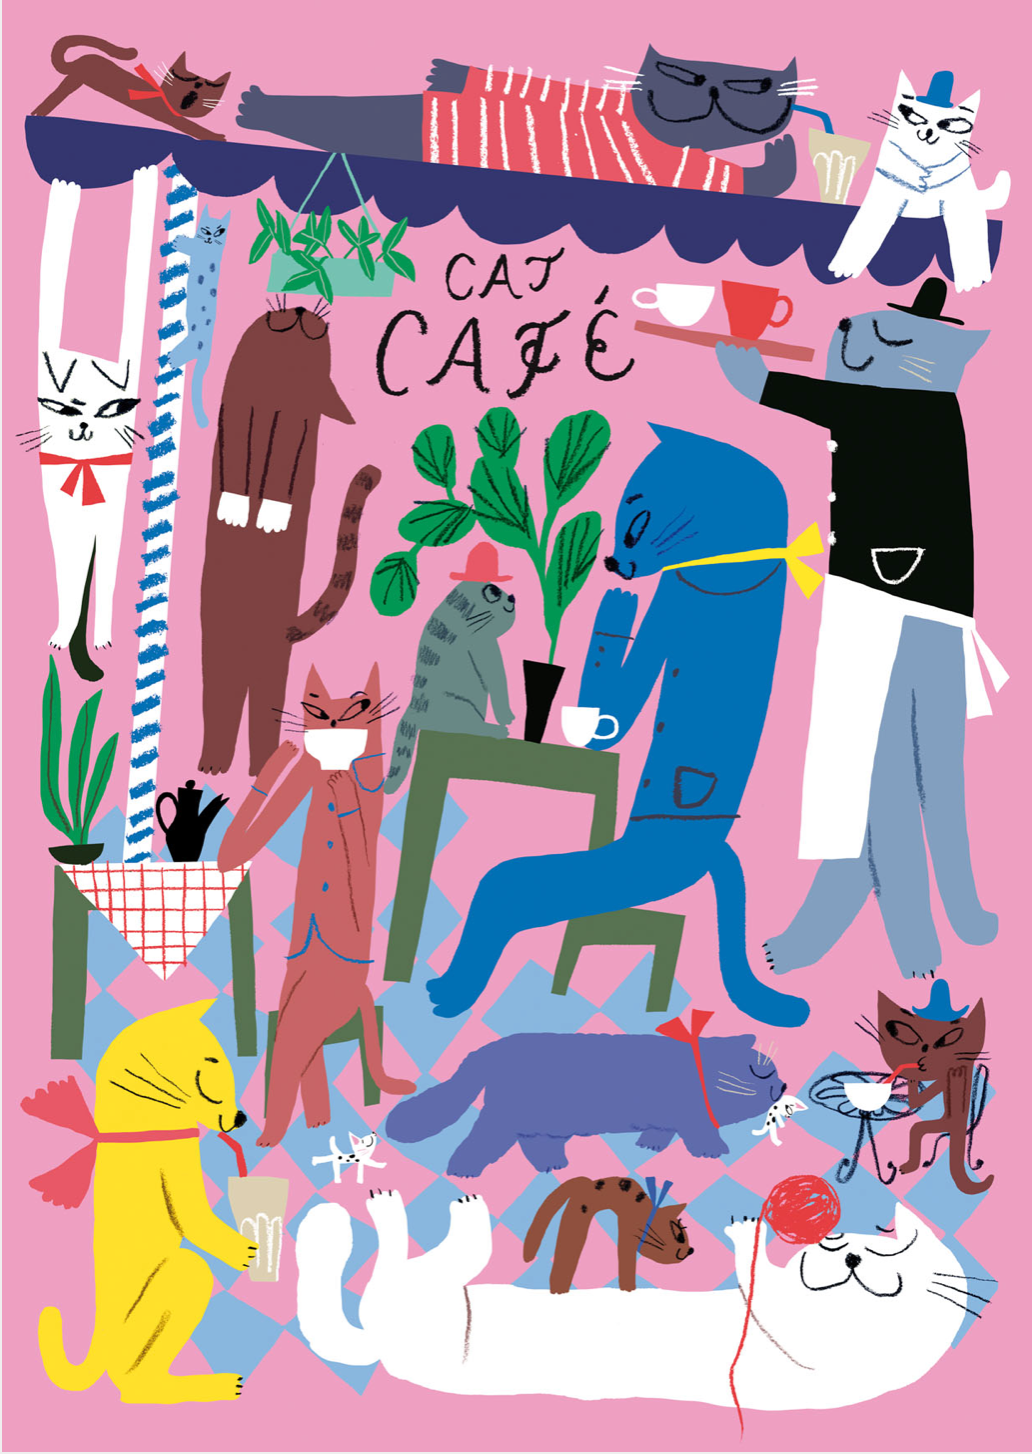 Seen of a colorful cat cafe on pink background.